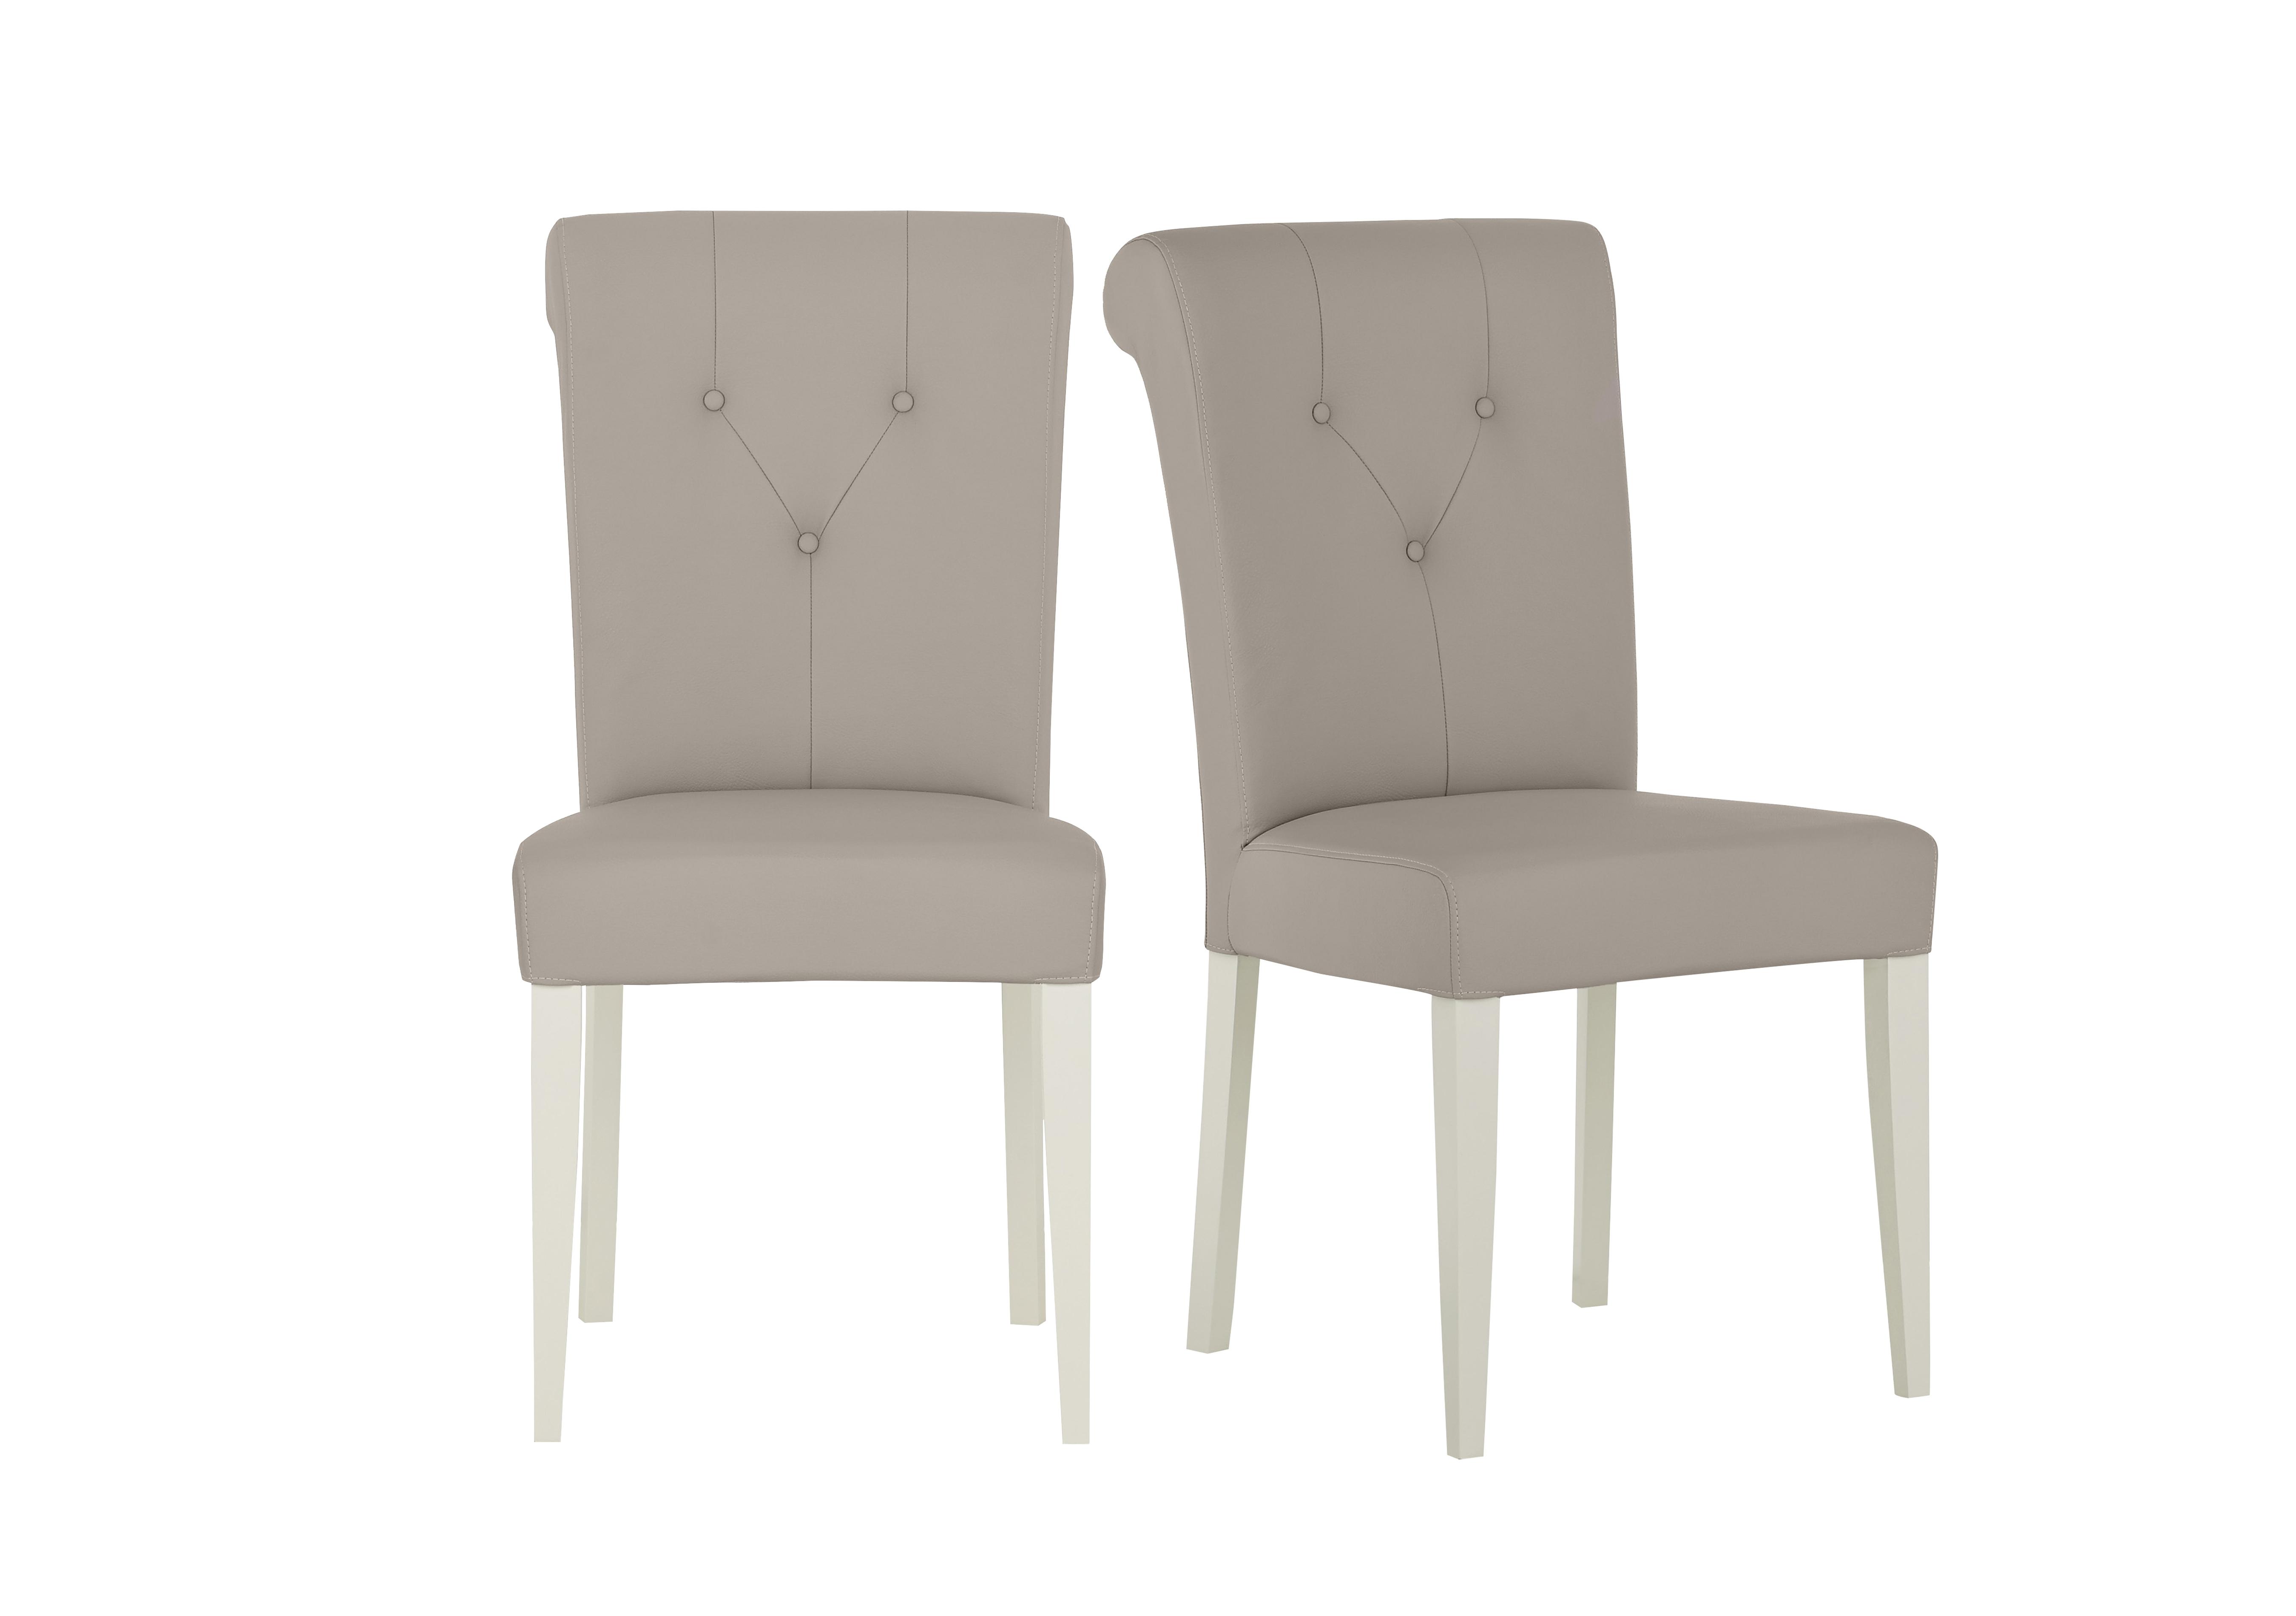 Annecy Pair of Upholstered Faux Leather Roll Back Dining Chairs in Soft Grey Paint on Furniture Village